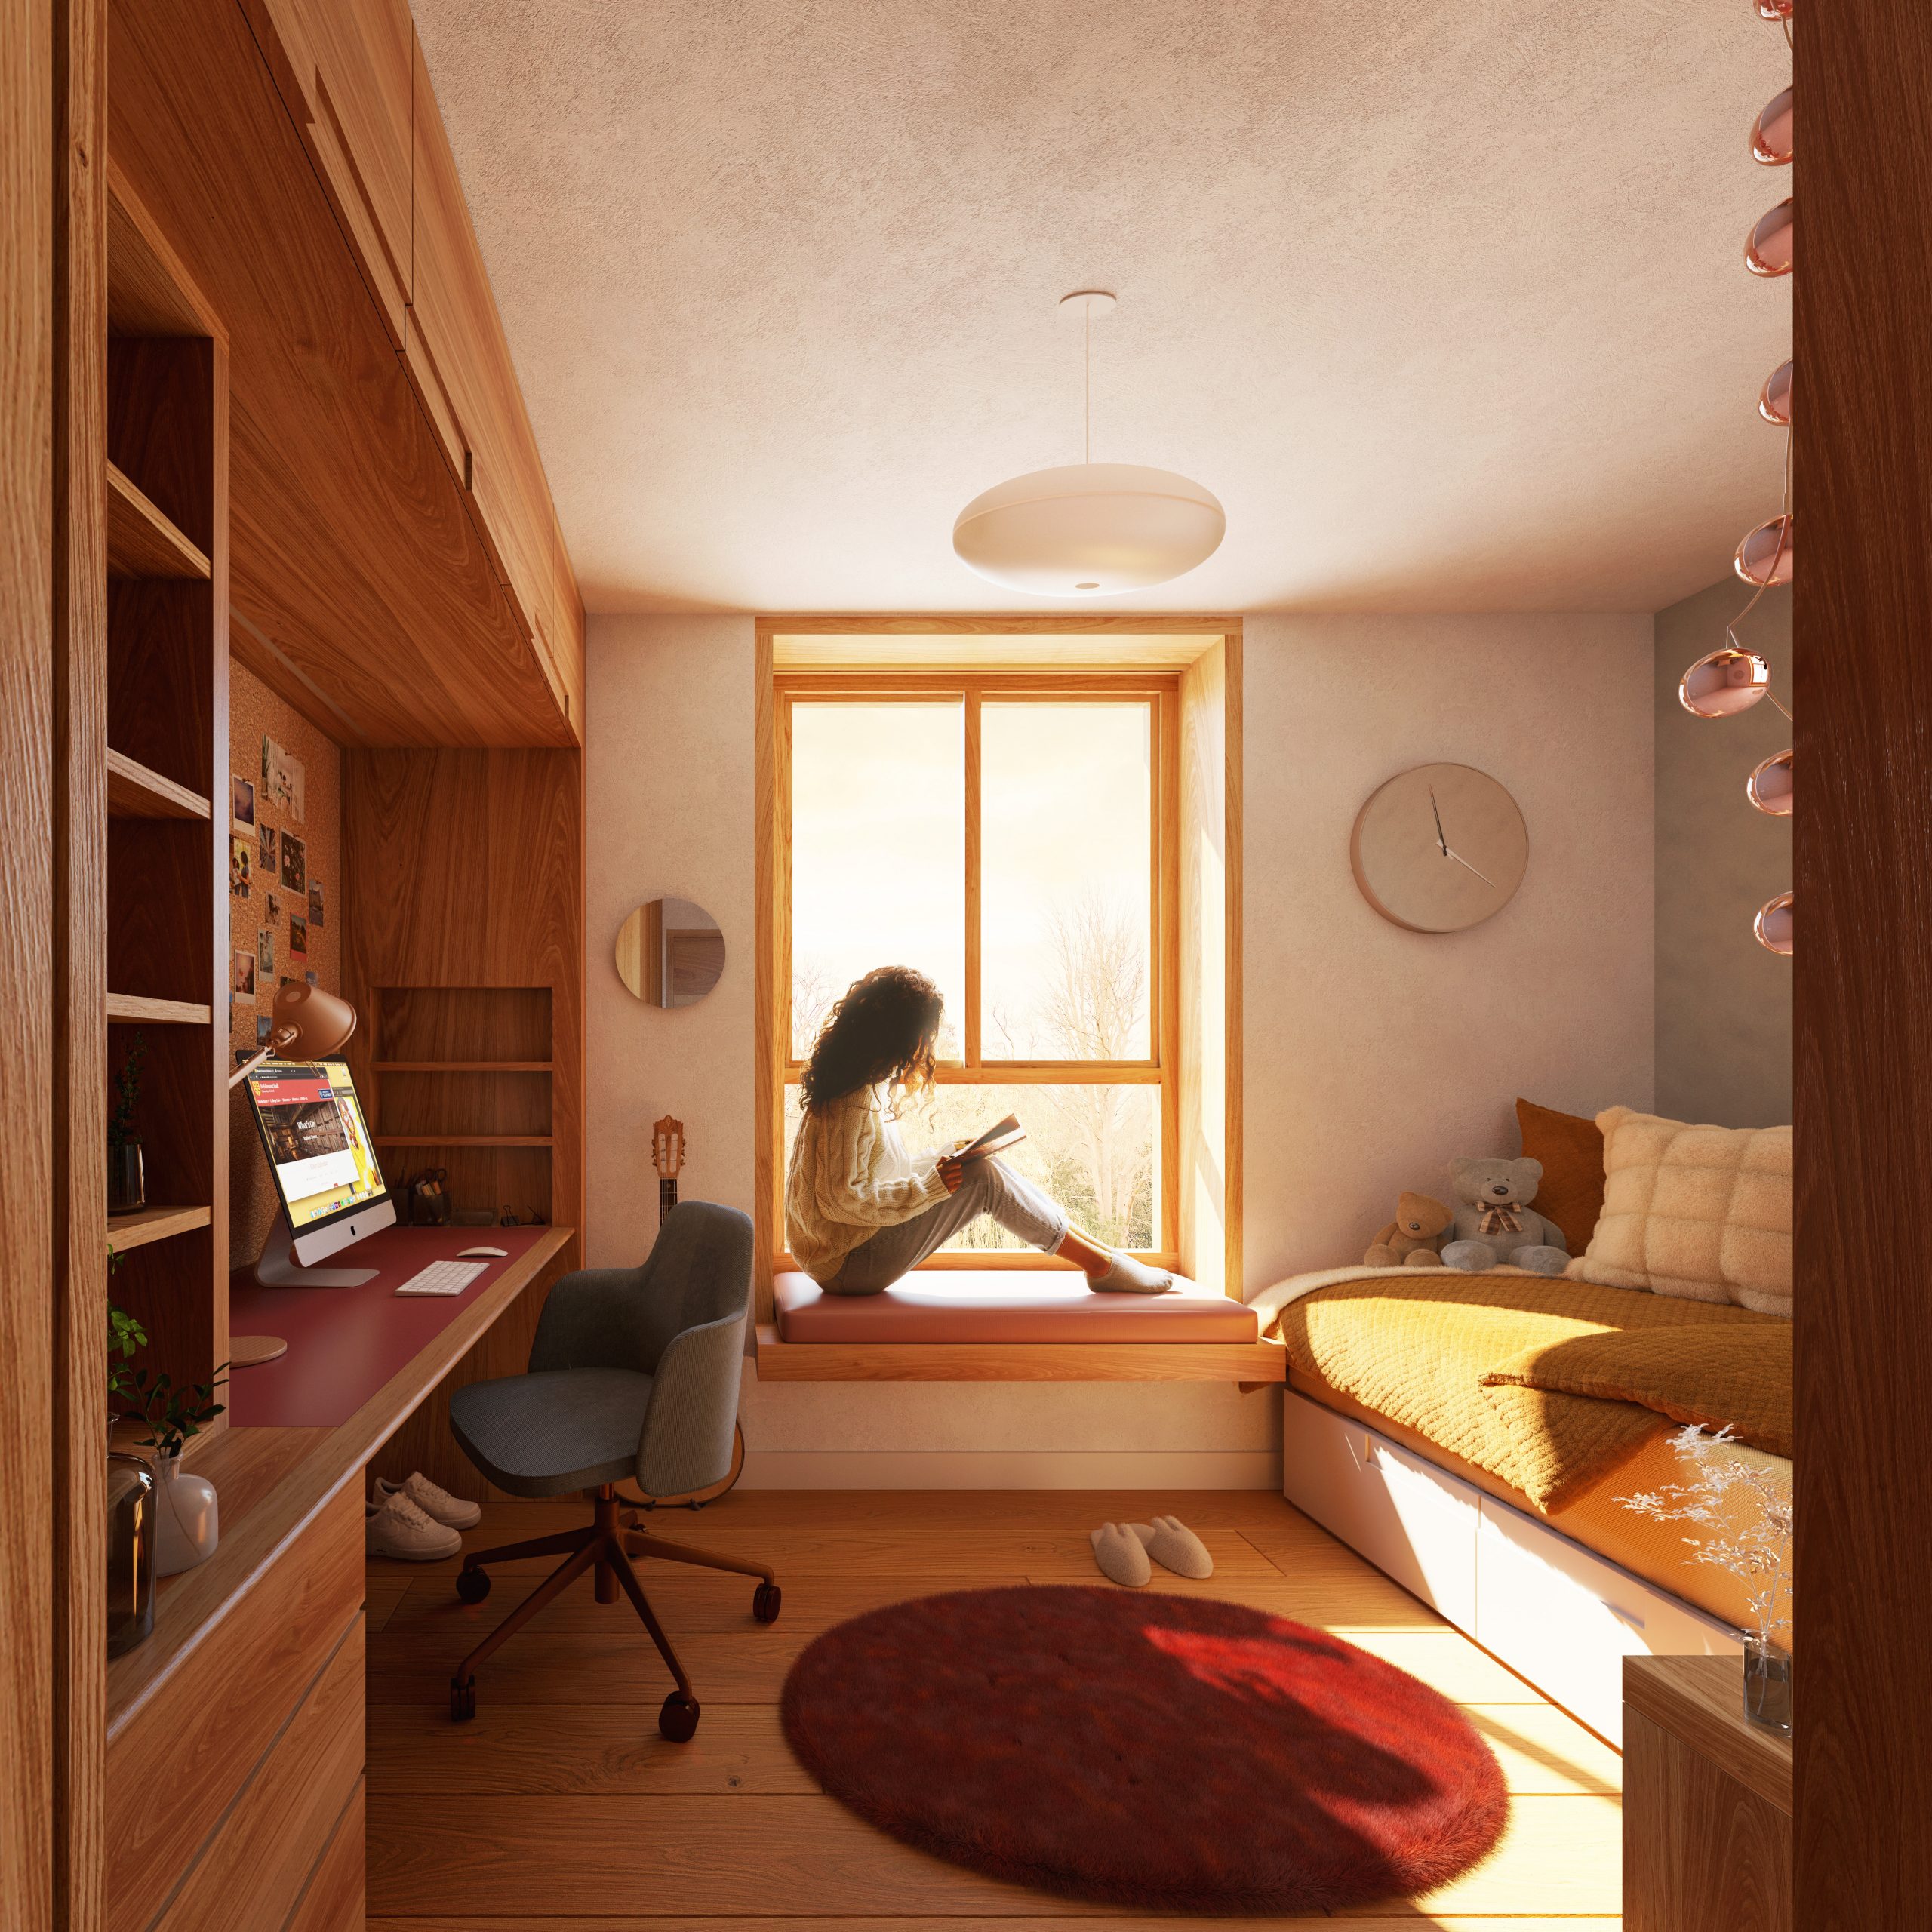 Student study bedroom with window view of gardens